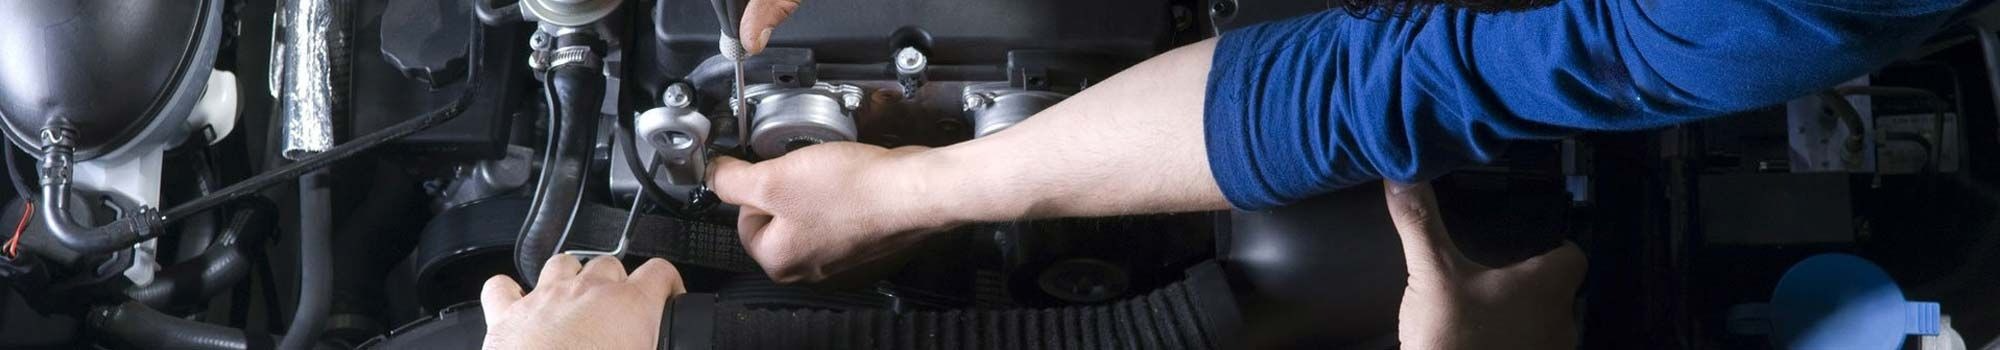 Ford Transit Servicing Offers